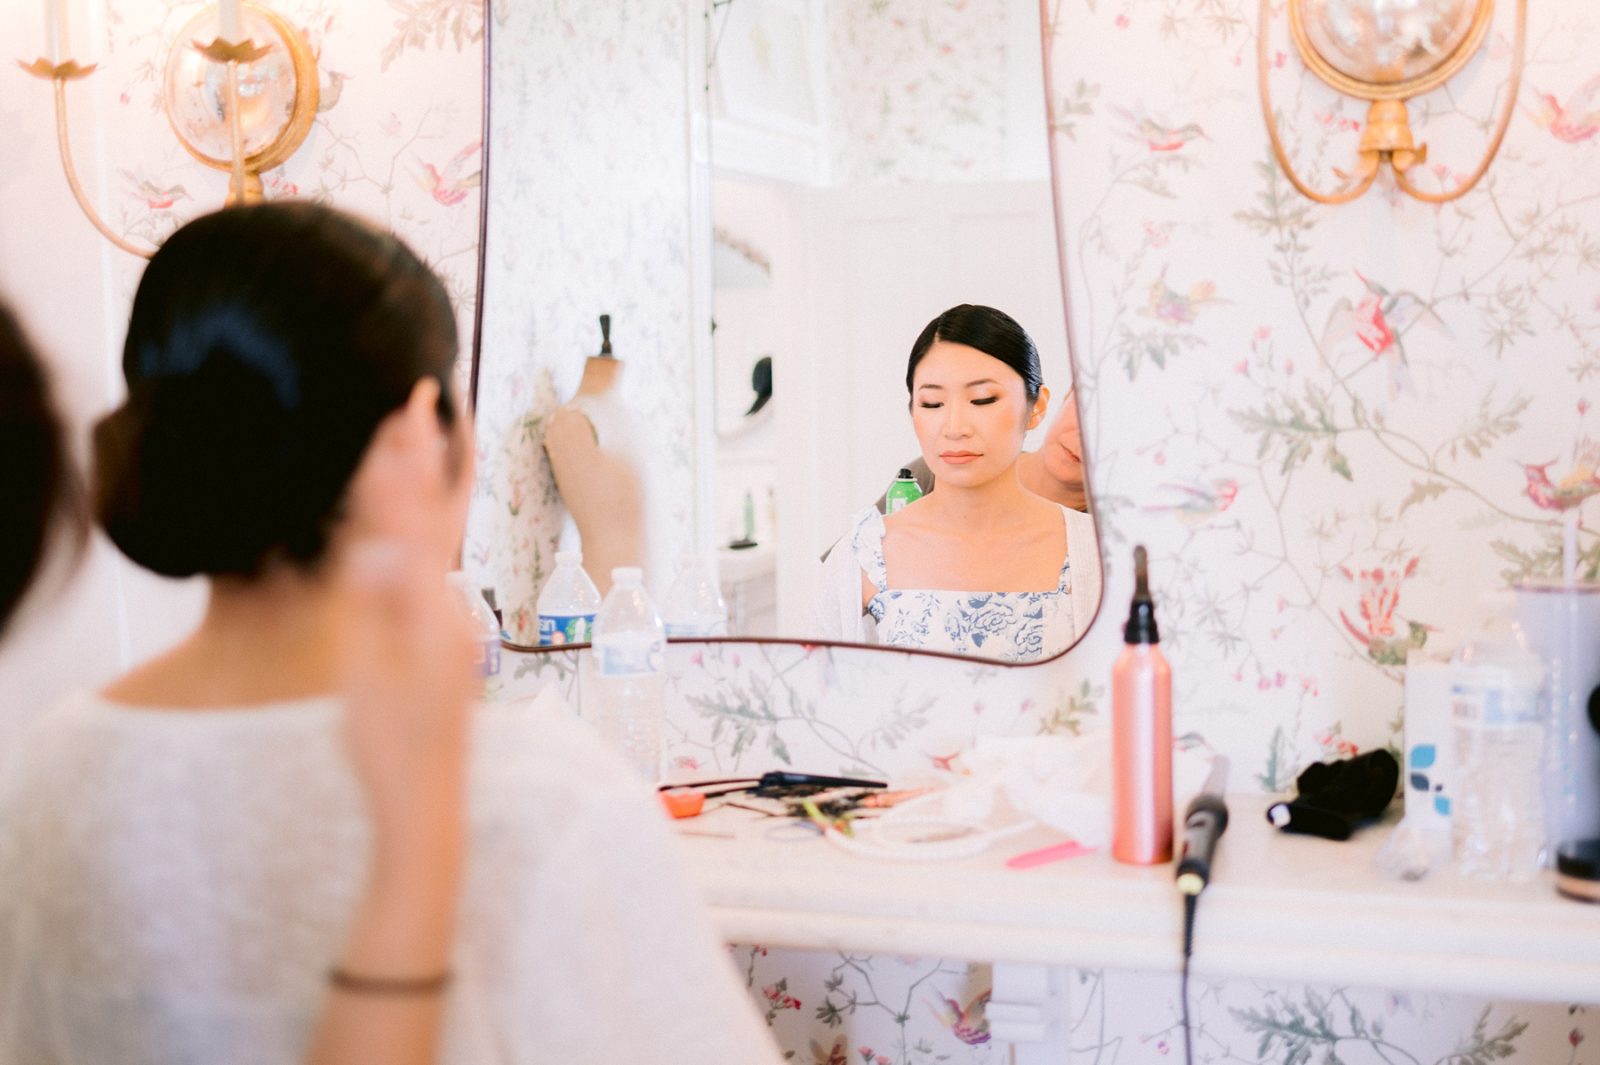 bride getting ready in front of mirror, bride putting on makeup, woodbine mansion bridal suite, woodbine mansion wedding, woodbine mansion wedding details, classic austin wedding, mansion wedding venues near austin, historical wedding venue, best austin wedding venues, austin wedding photographer, hill country wedding, round rock wedding venue